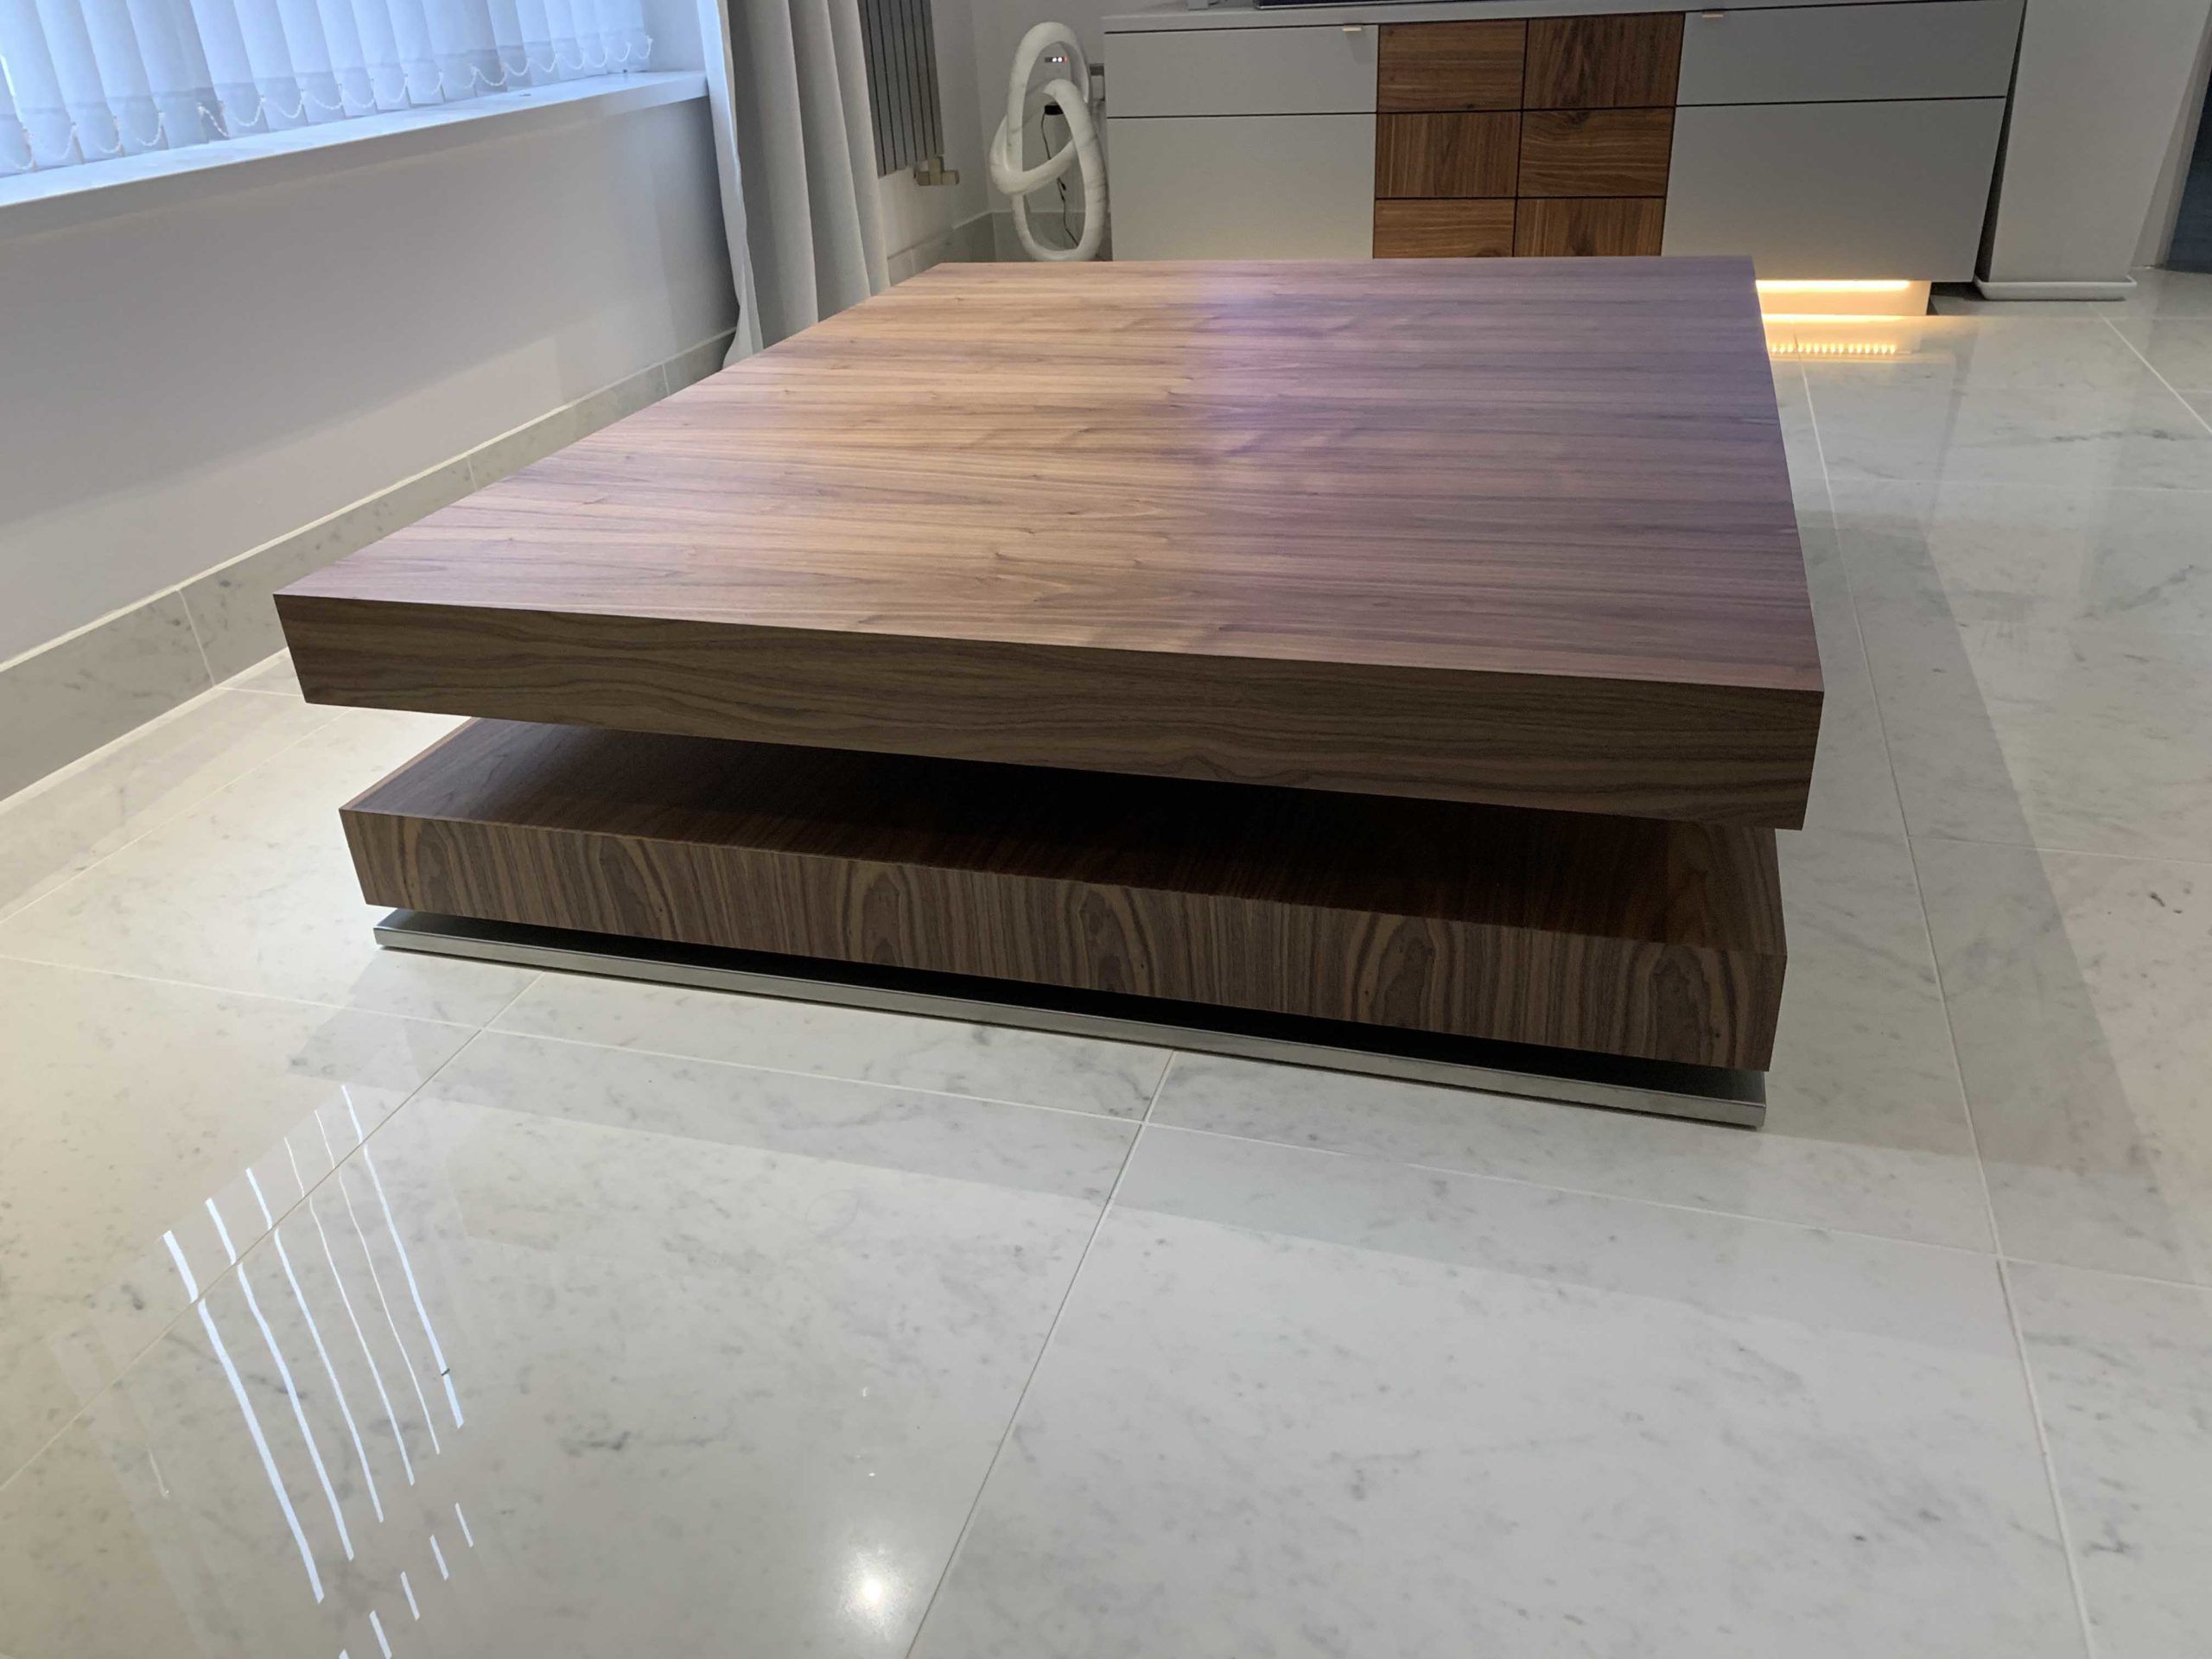 Dark Walnut Drink Tables Within Most Up To Date American Black Walnut Modern Coffee Table – Newcastle (View 2 of 20)